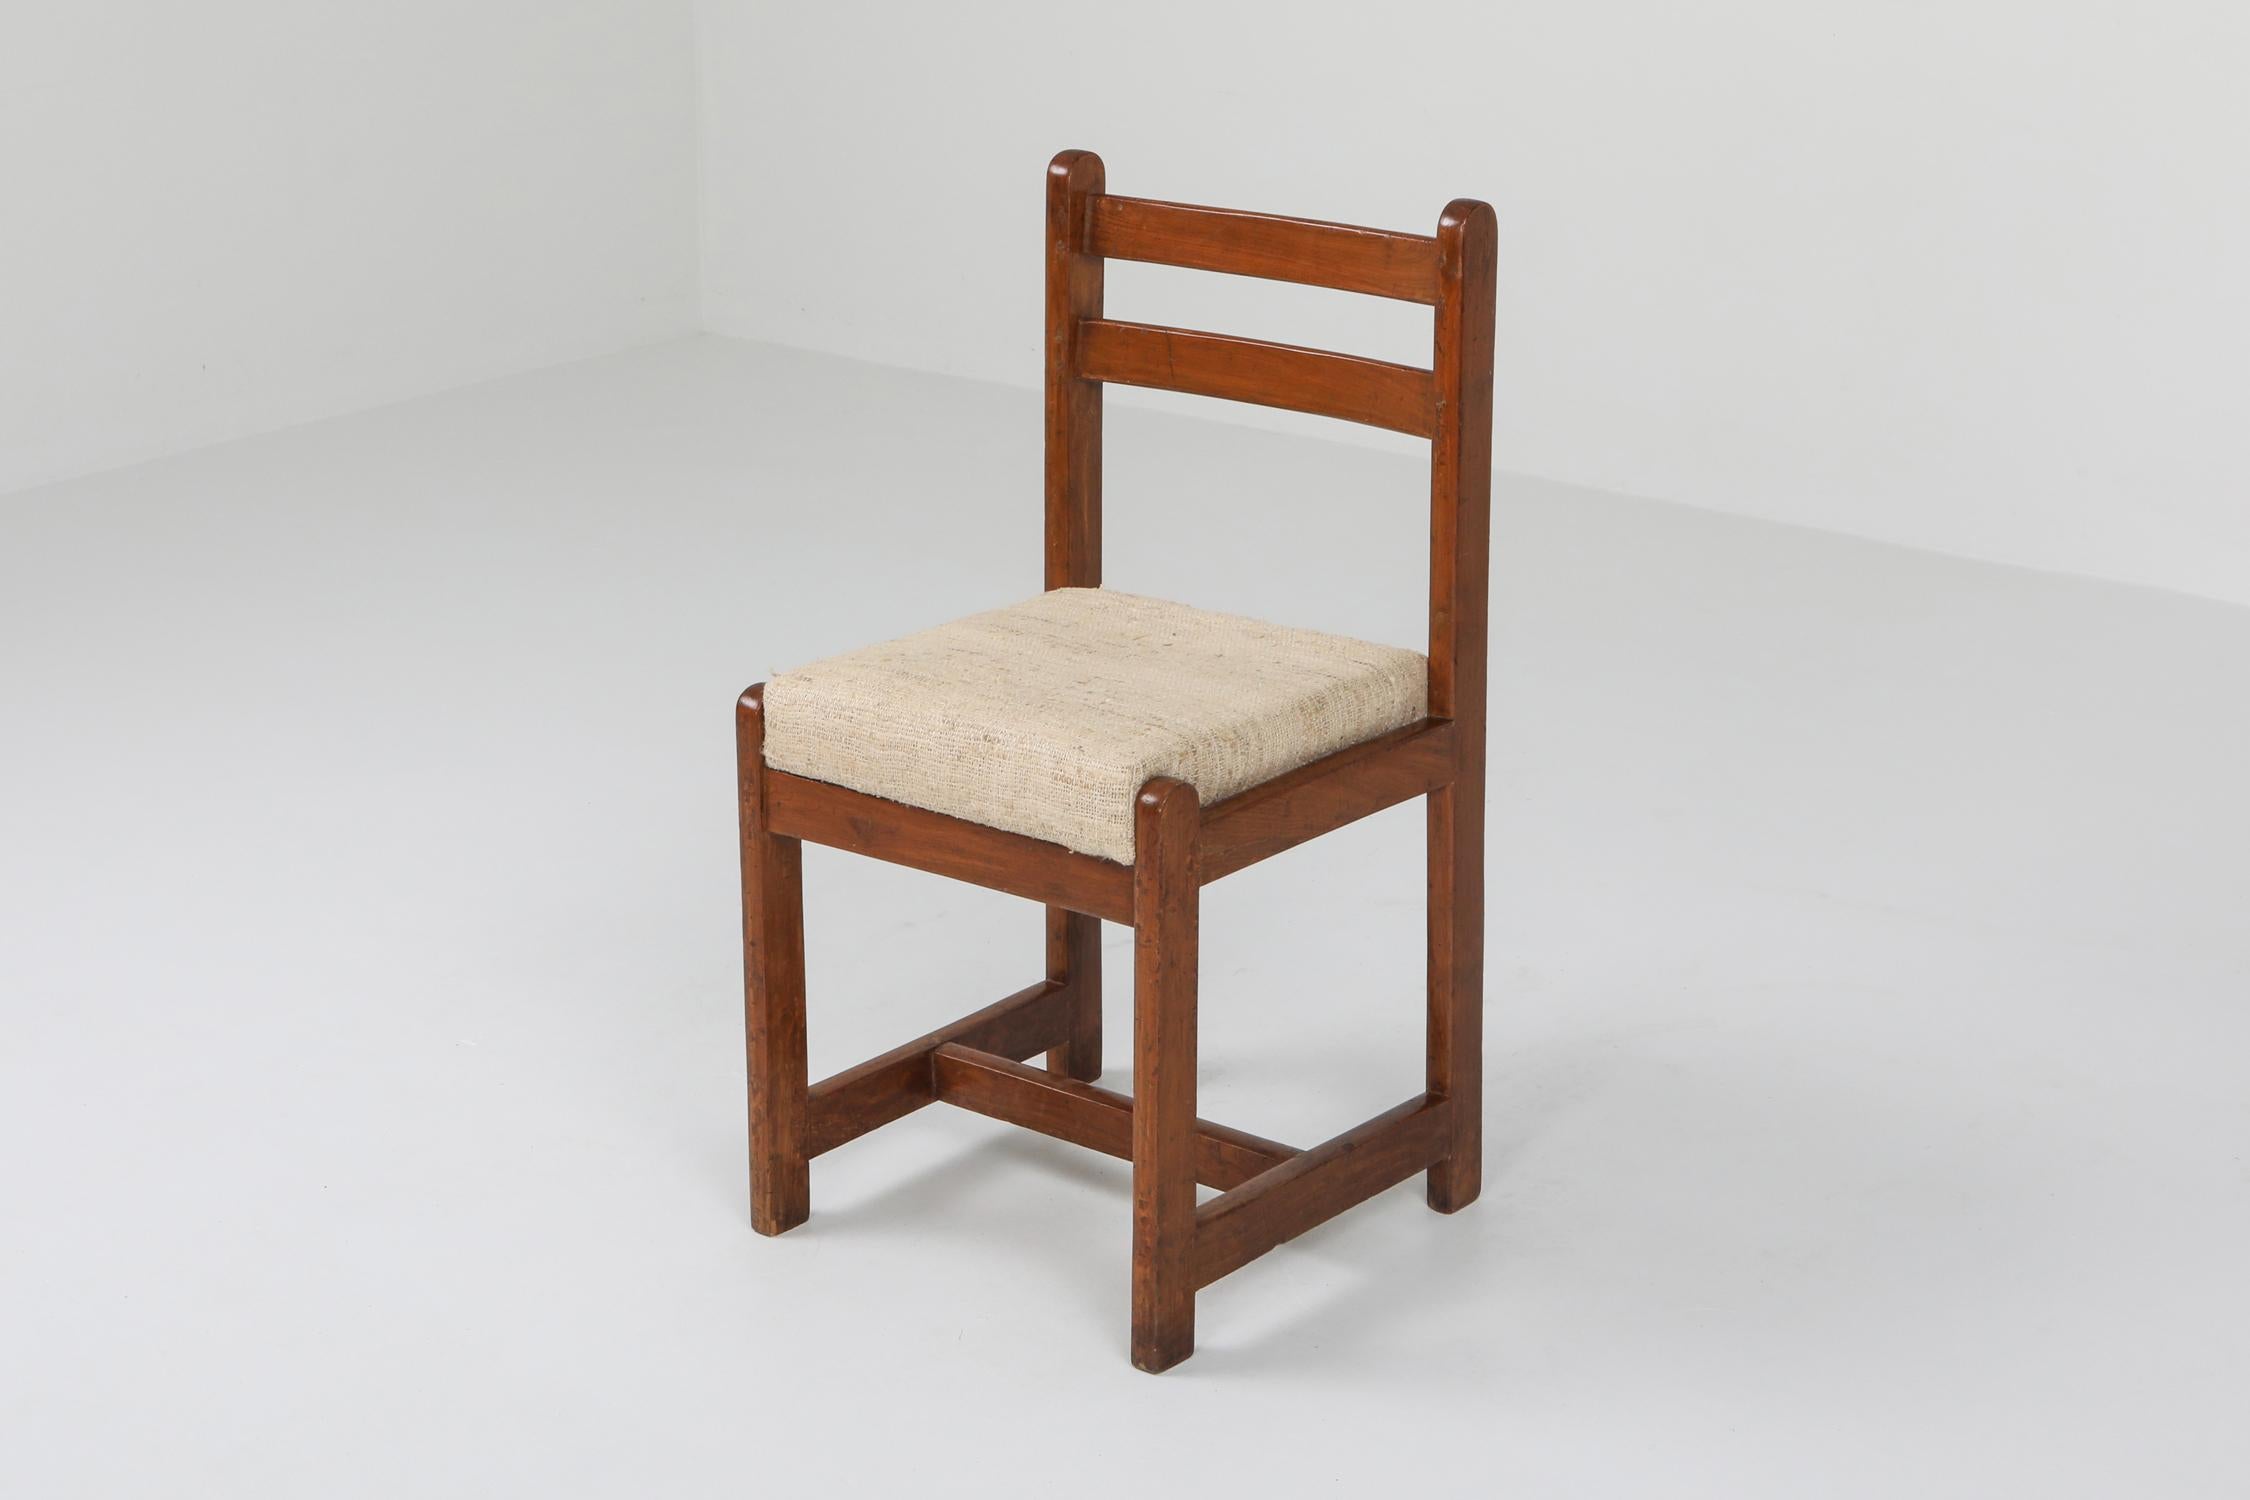 Chandigarh study model chair
prototype piece which was never incorporated in Chandigarh
woven linen seating
Designed by Corbusier cousin, Pierre Jeanneret. 
France/India, circa 1960. 

Literature: Le Corbusier Pierre Jeanneret: The Indian